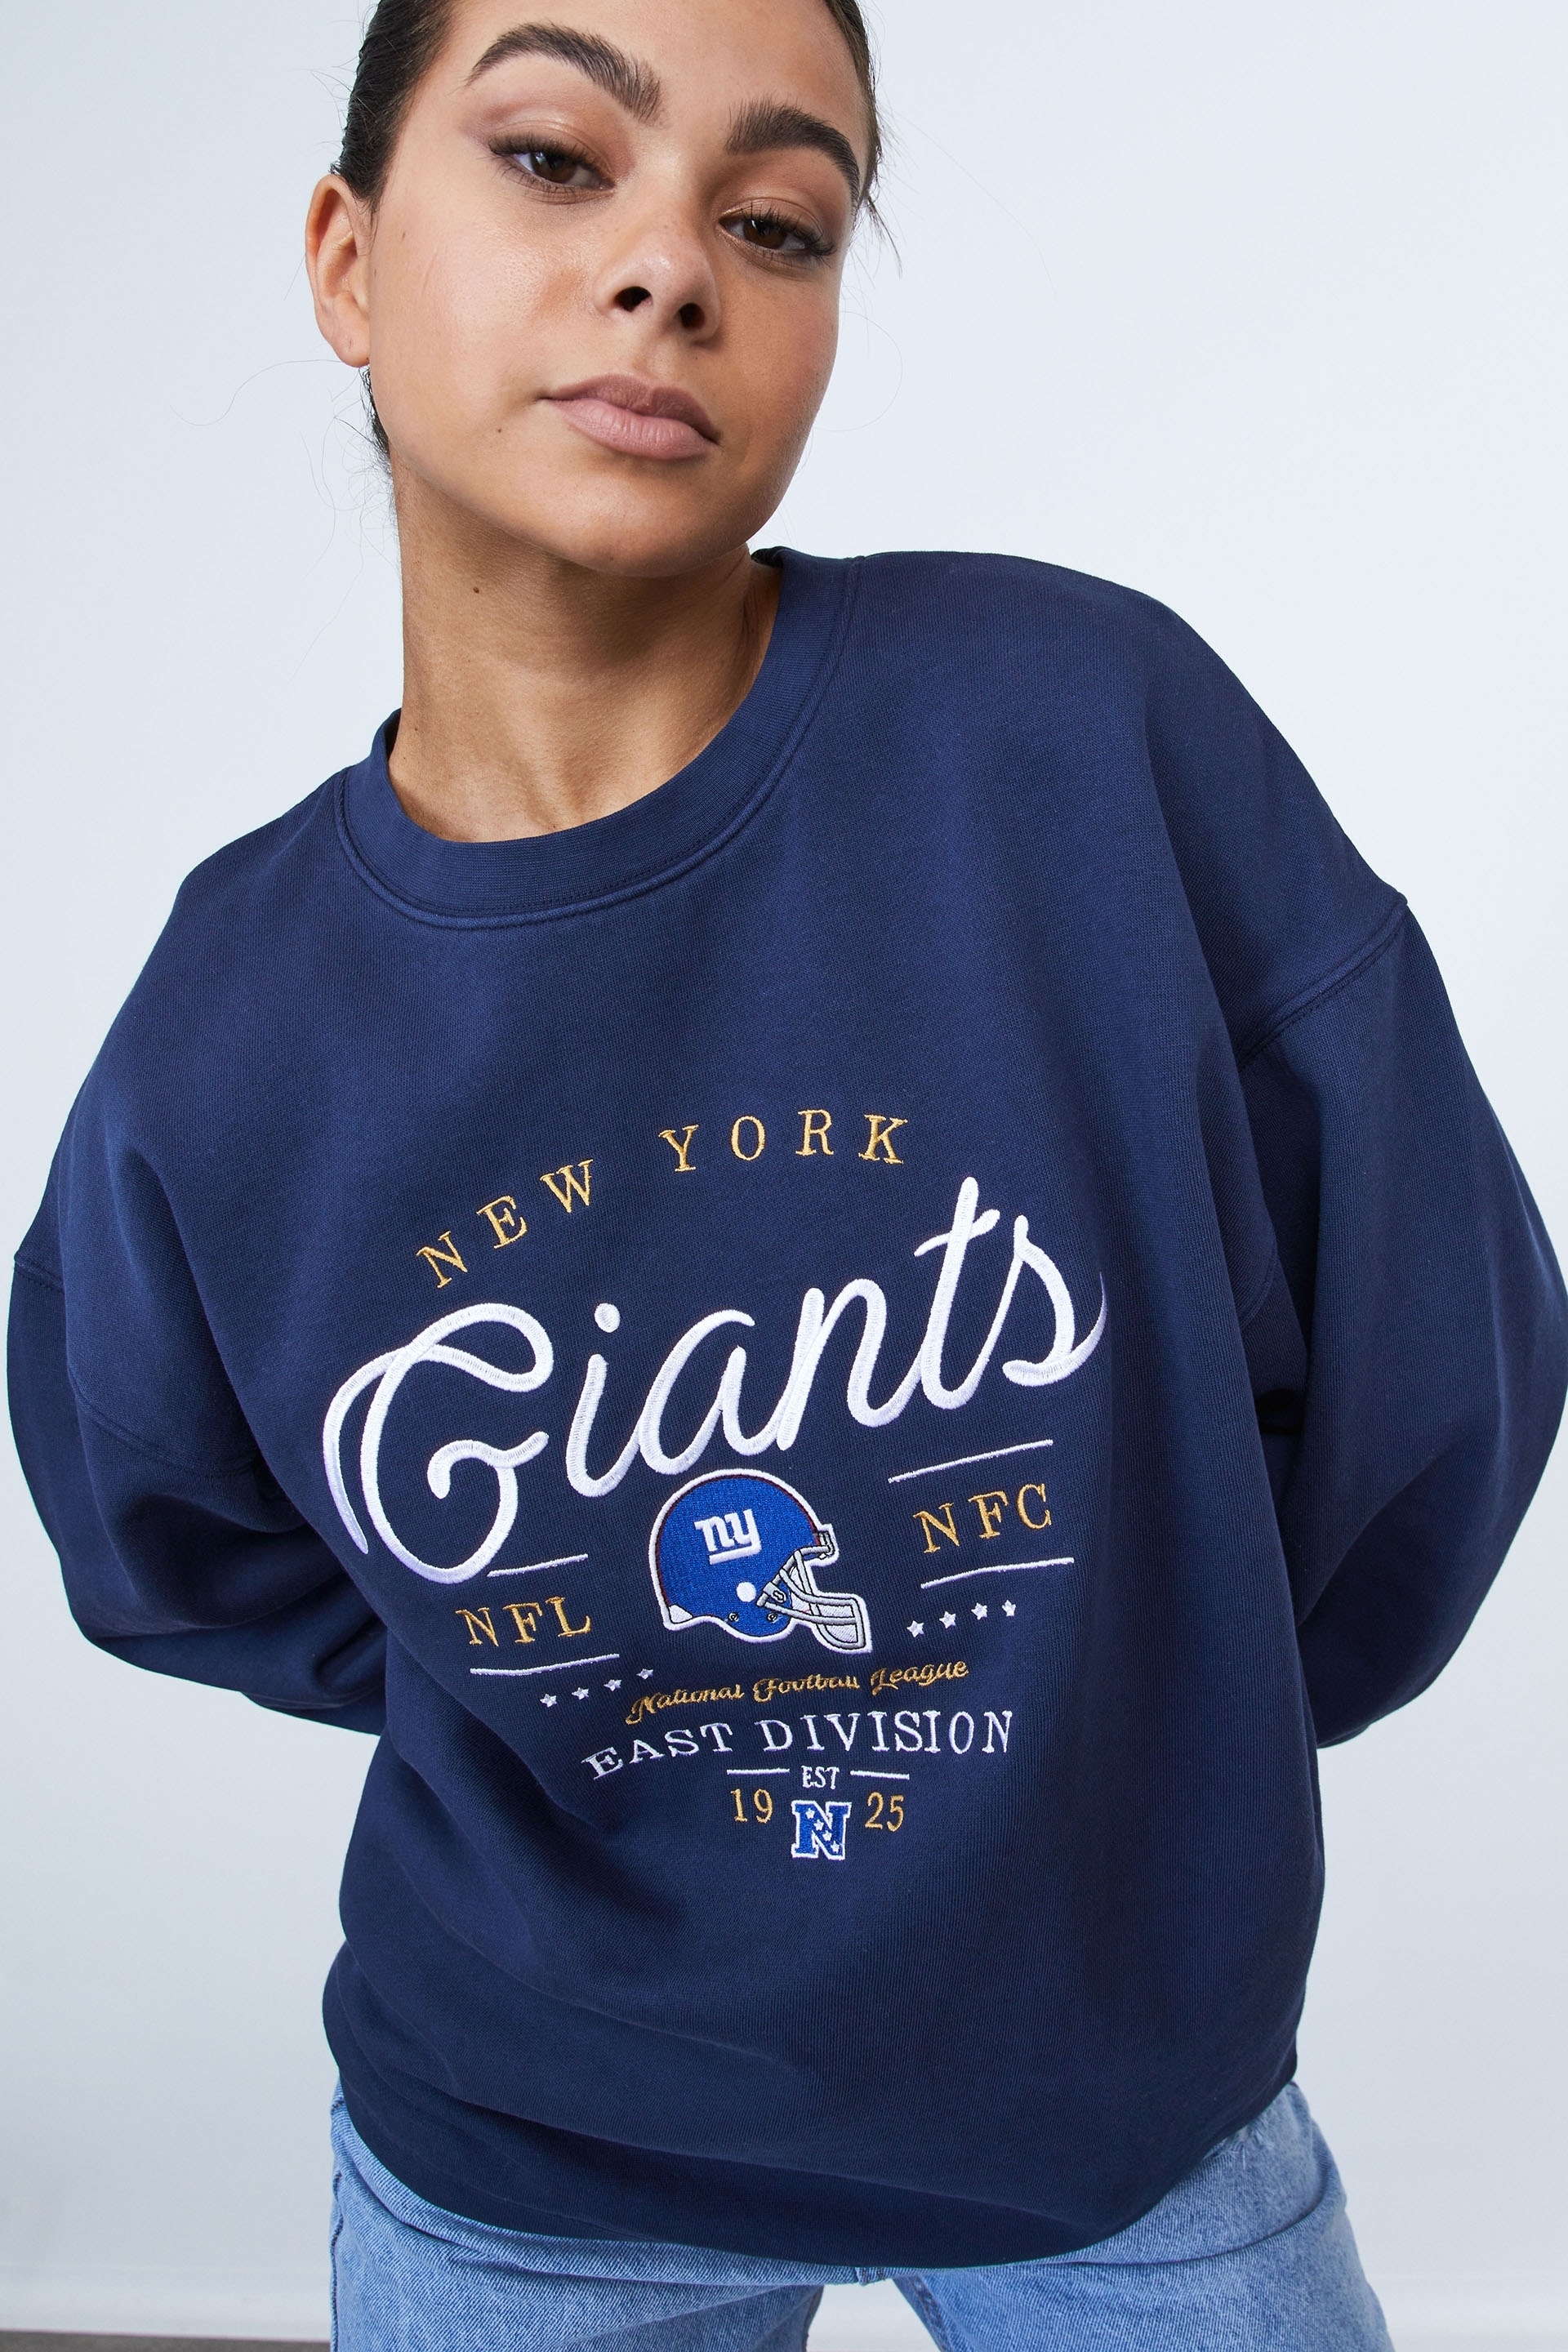 Factorie - Lcn Nfl Oversized Graphic Crew - Lcn nfl washed navy/giants